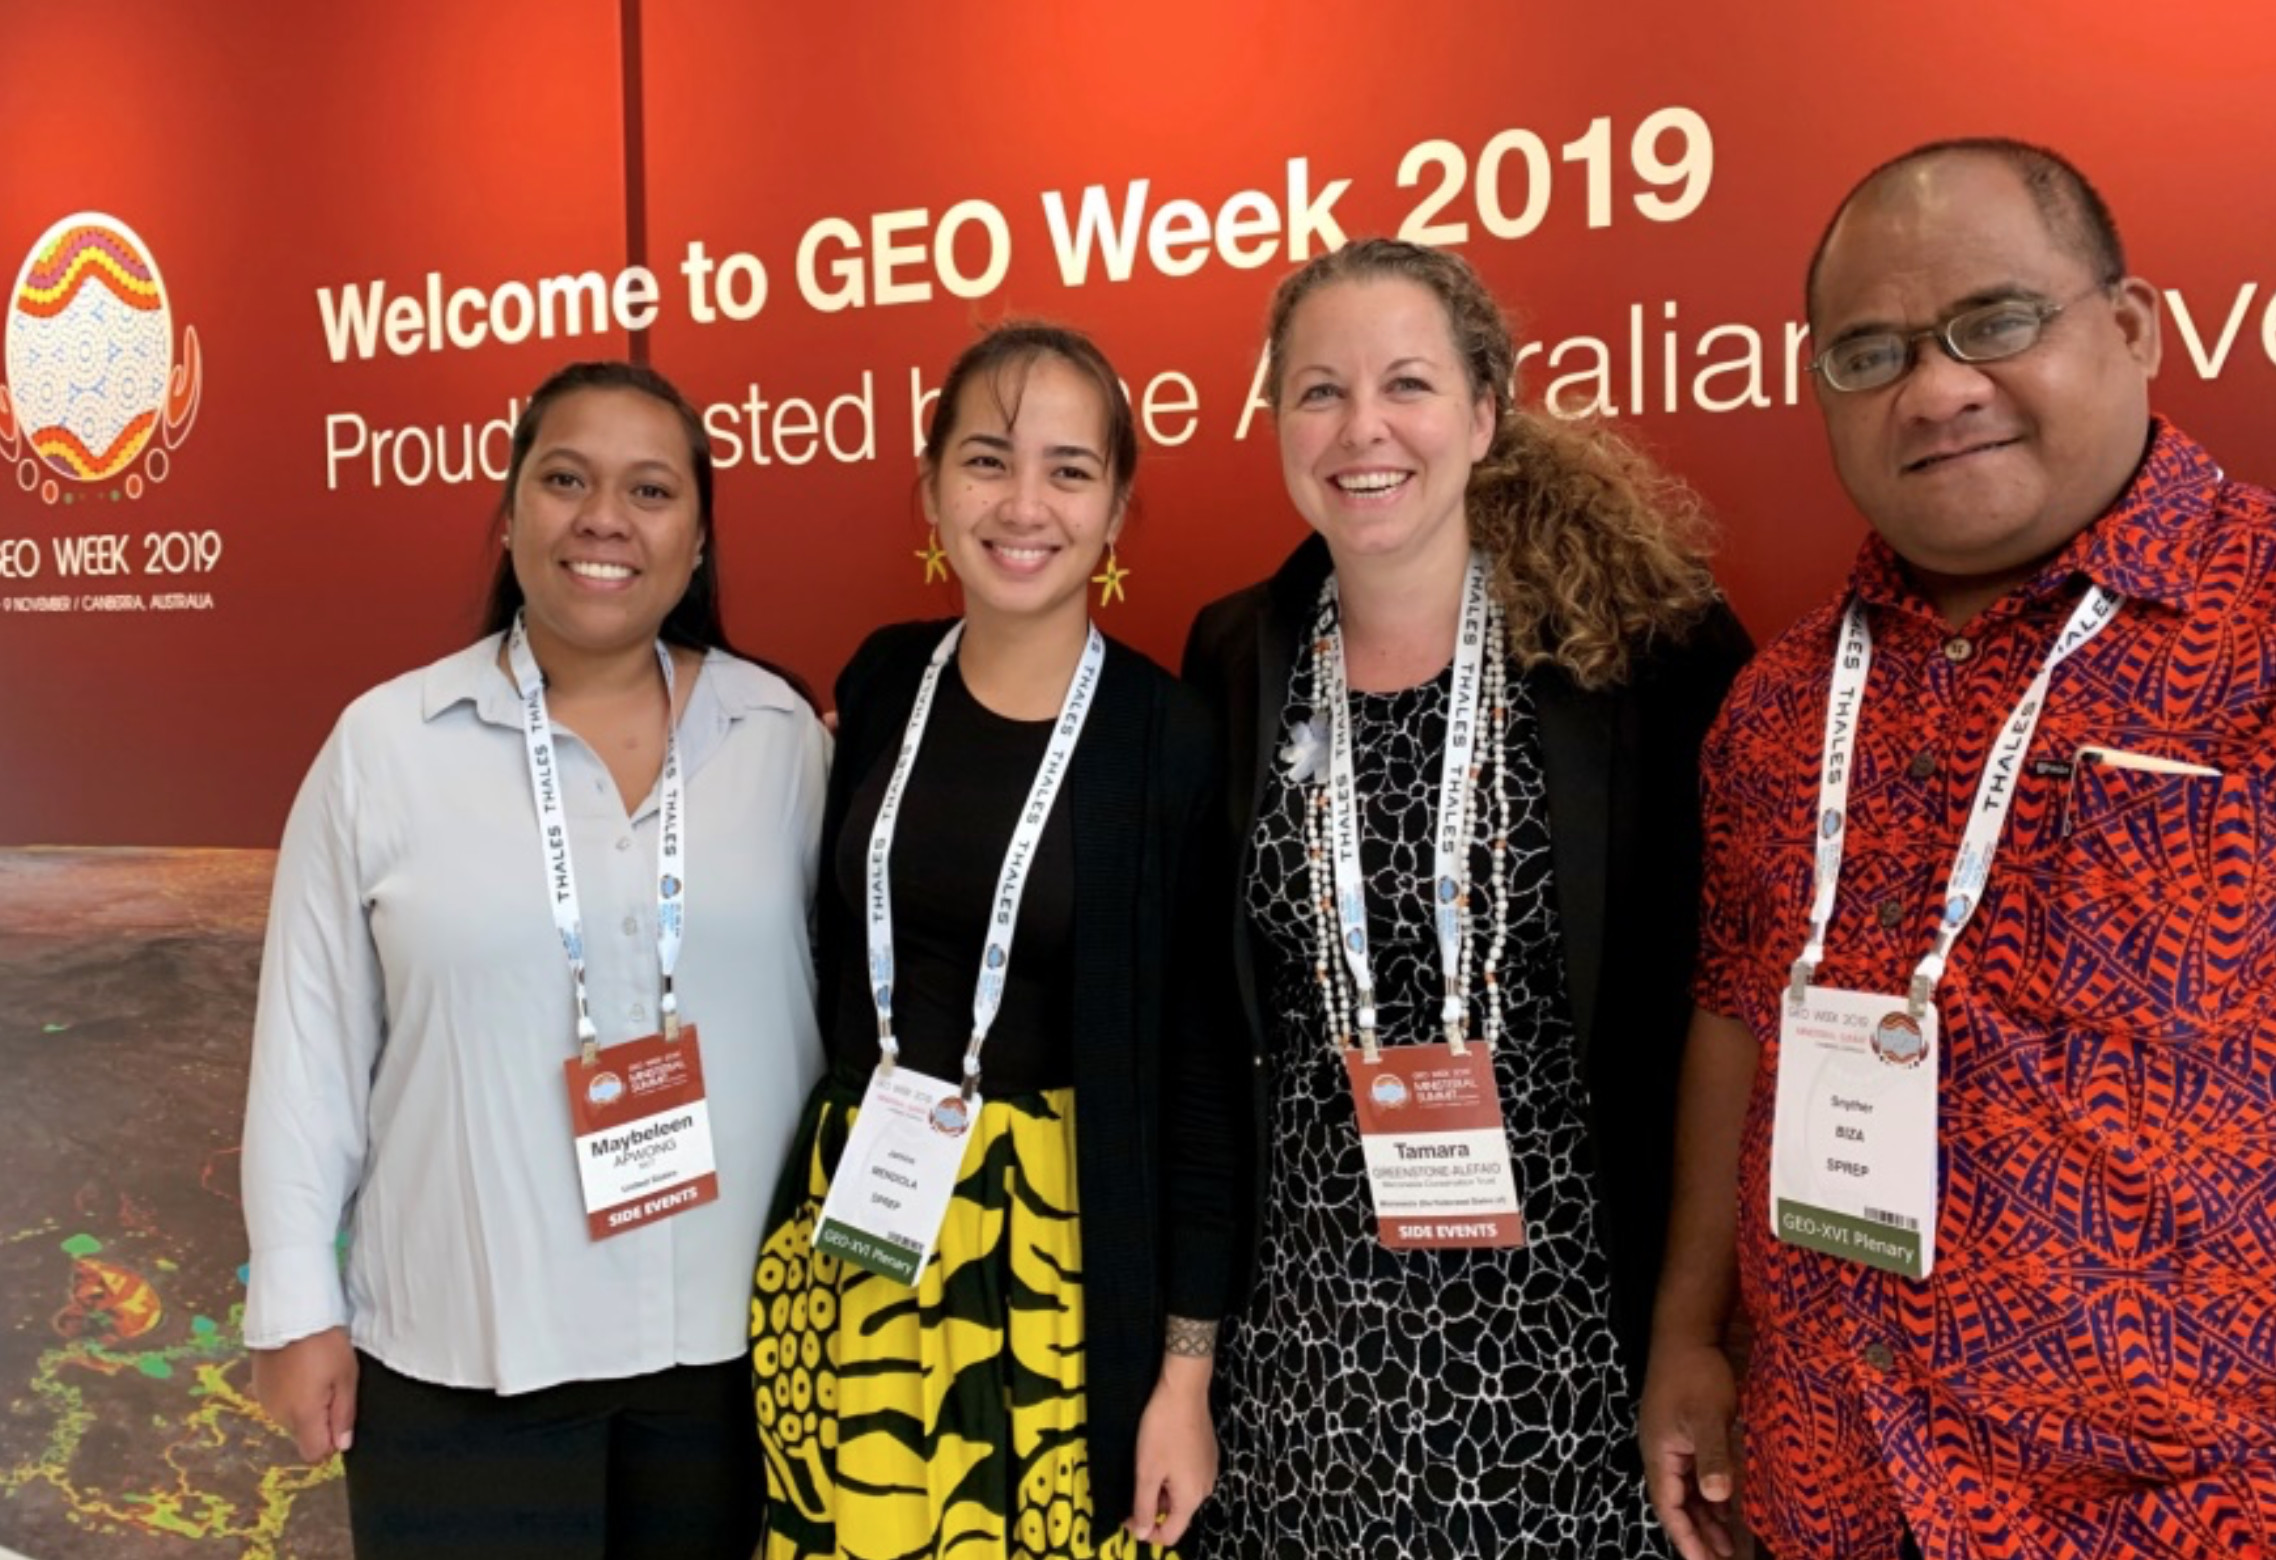 The Micronesia Conservation Trust team at GEO Week in Canberra, Australia in November 2019.